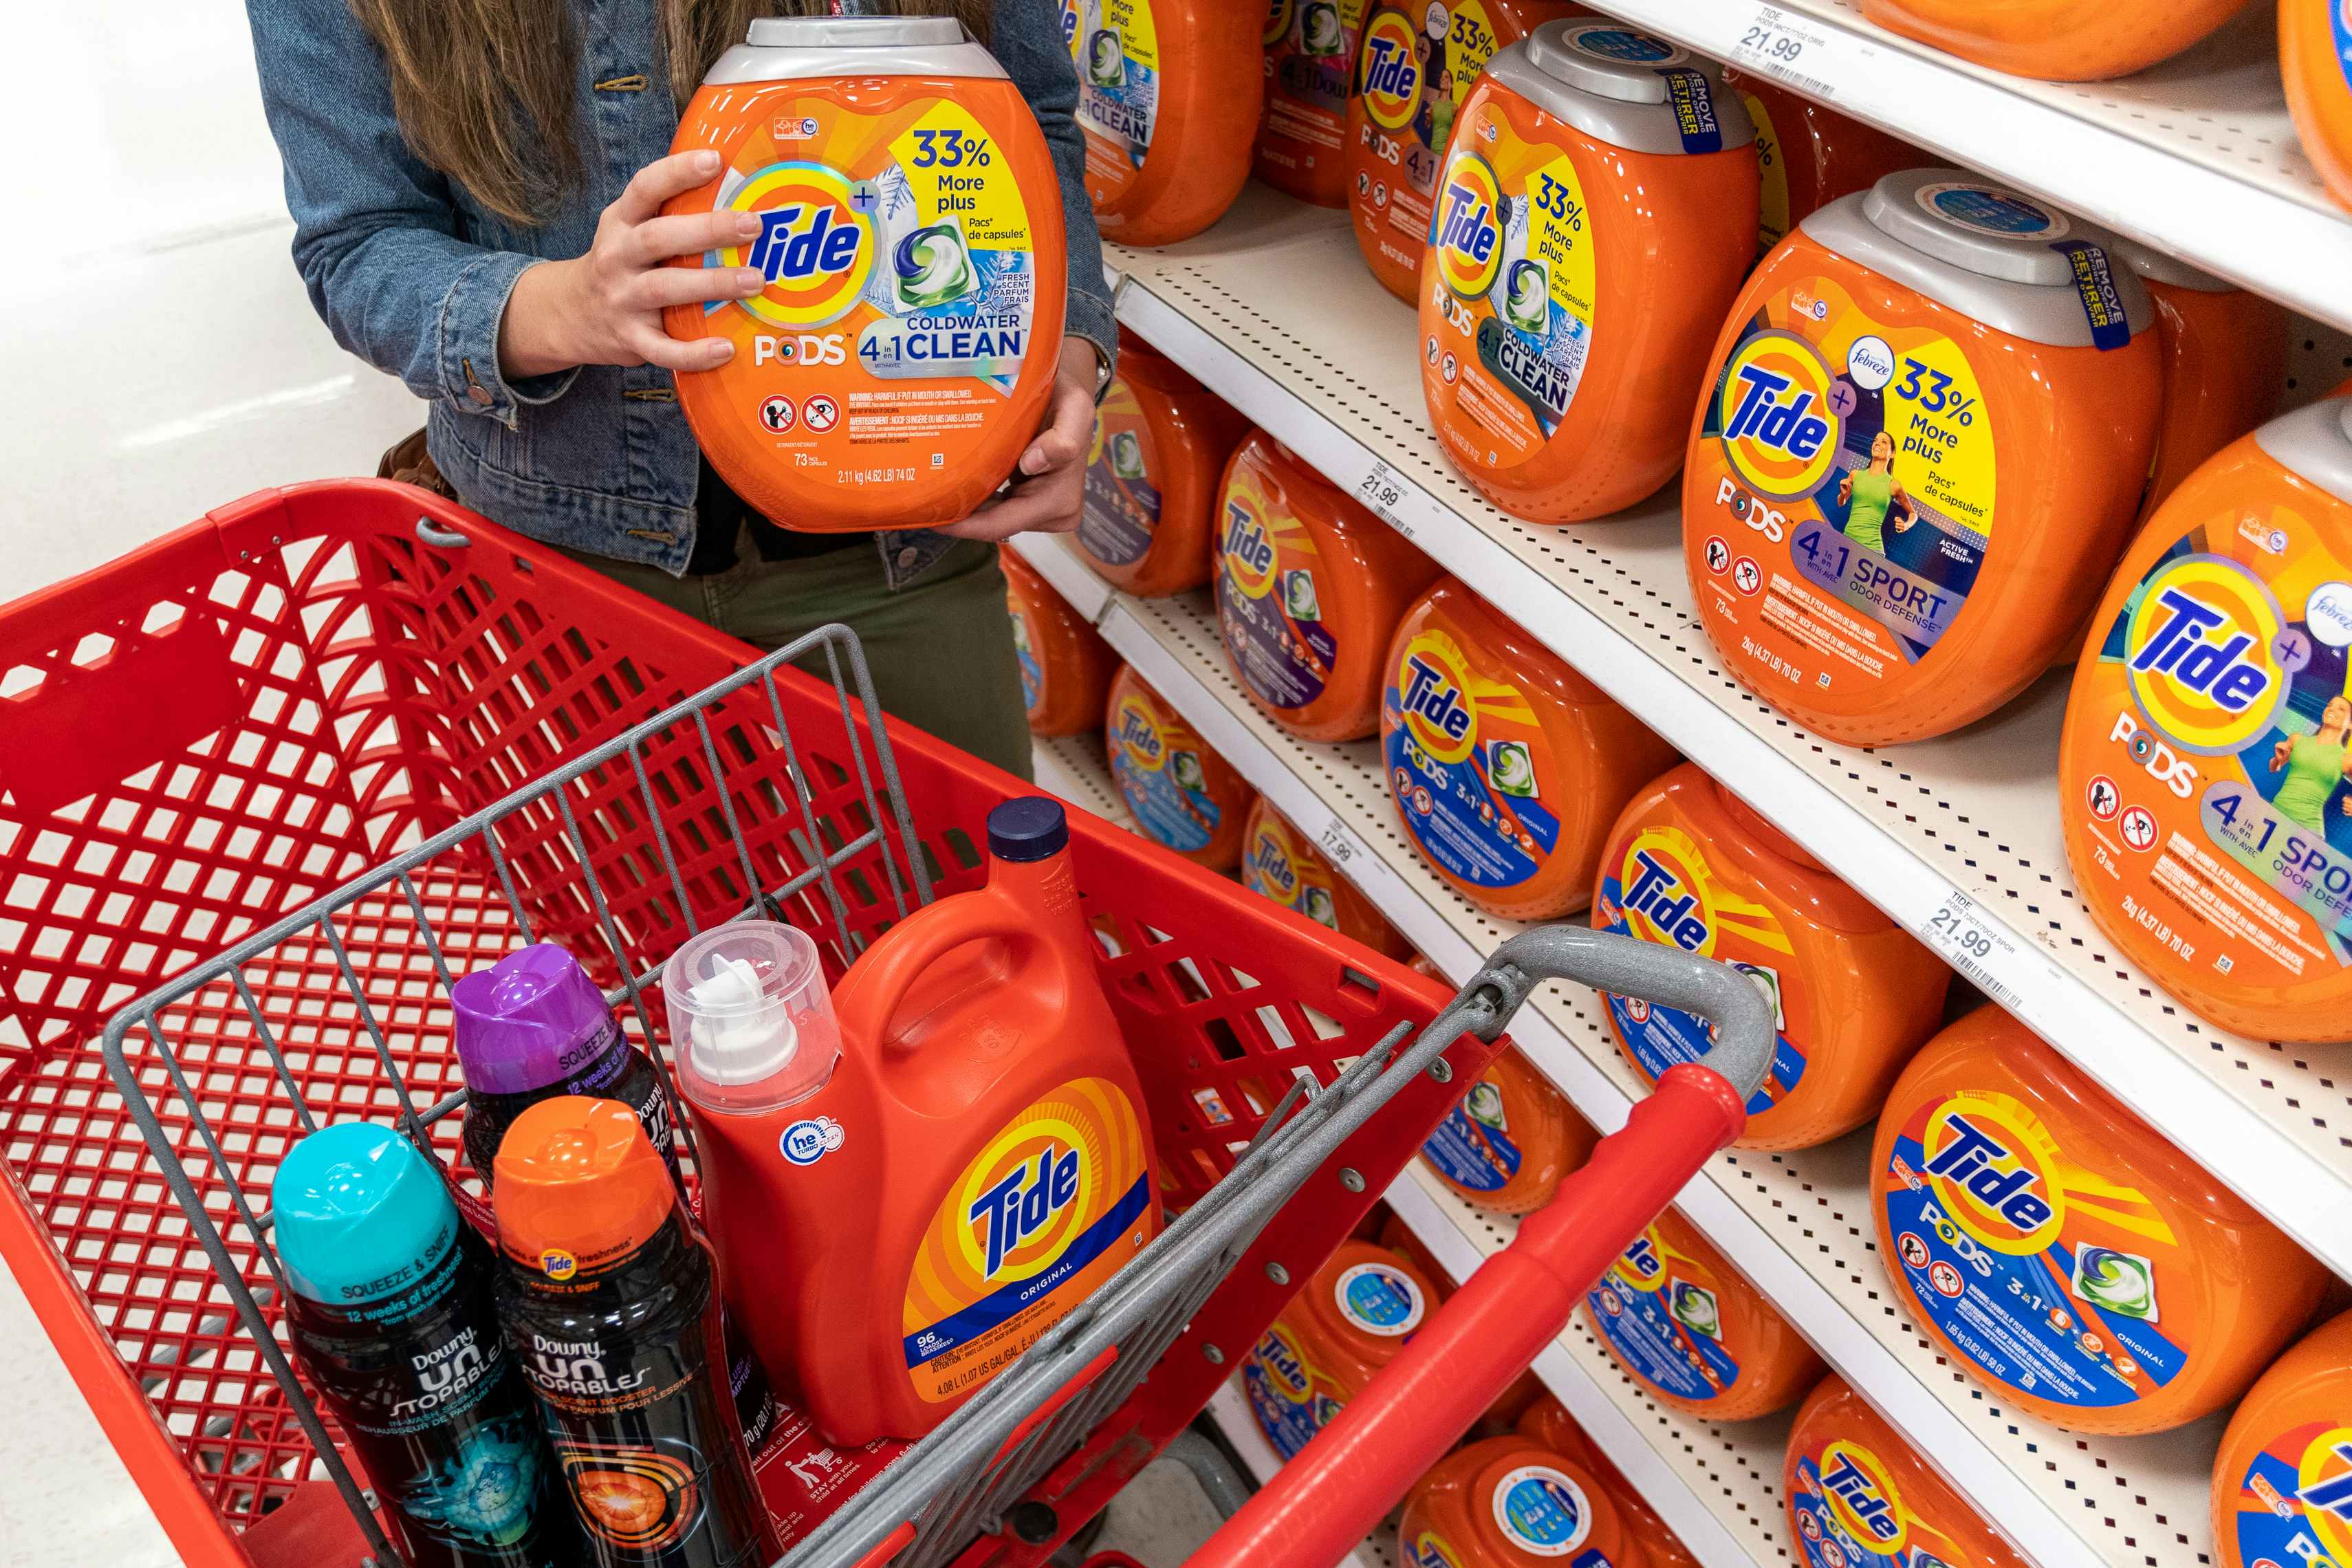 A woman standing behind a red Target shopping cart, holding a container of tide pods, with other laundry products in the shopping cart.